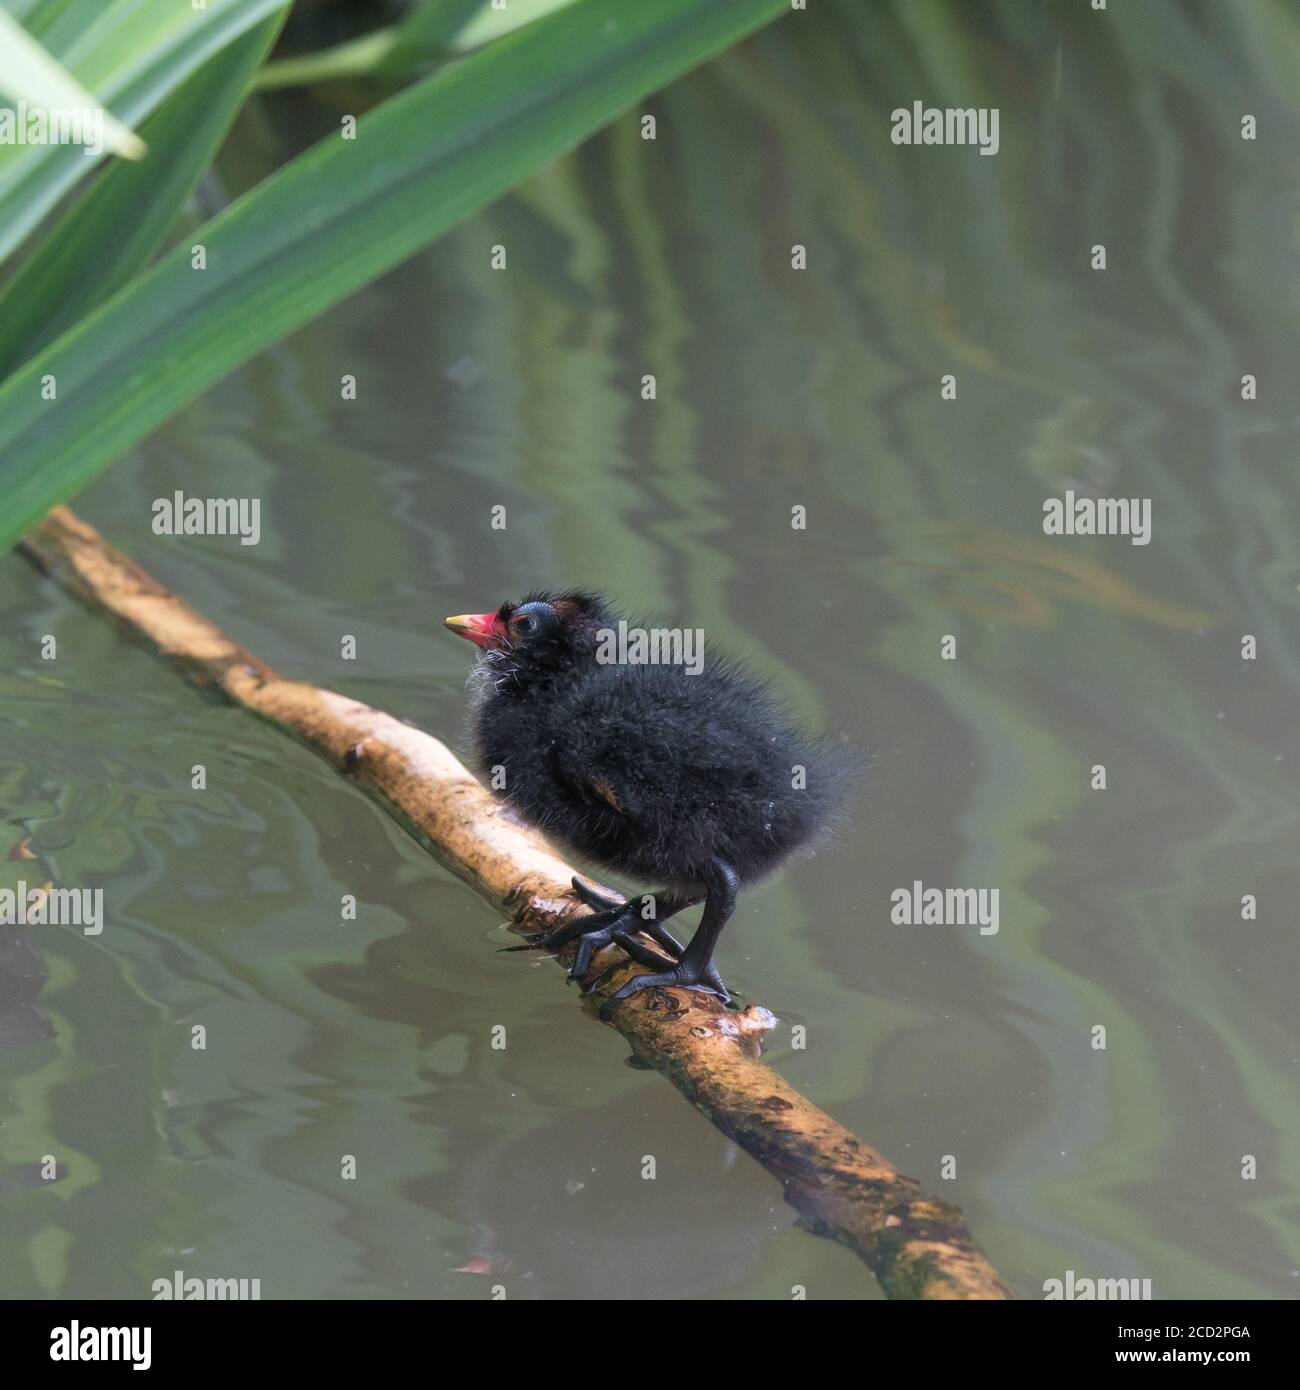 A moorhen chick stands on a stick in the water at the park. Taken in Pinner Memorial Park, Pinner, West London. Stock Photo